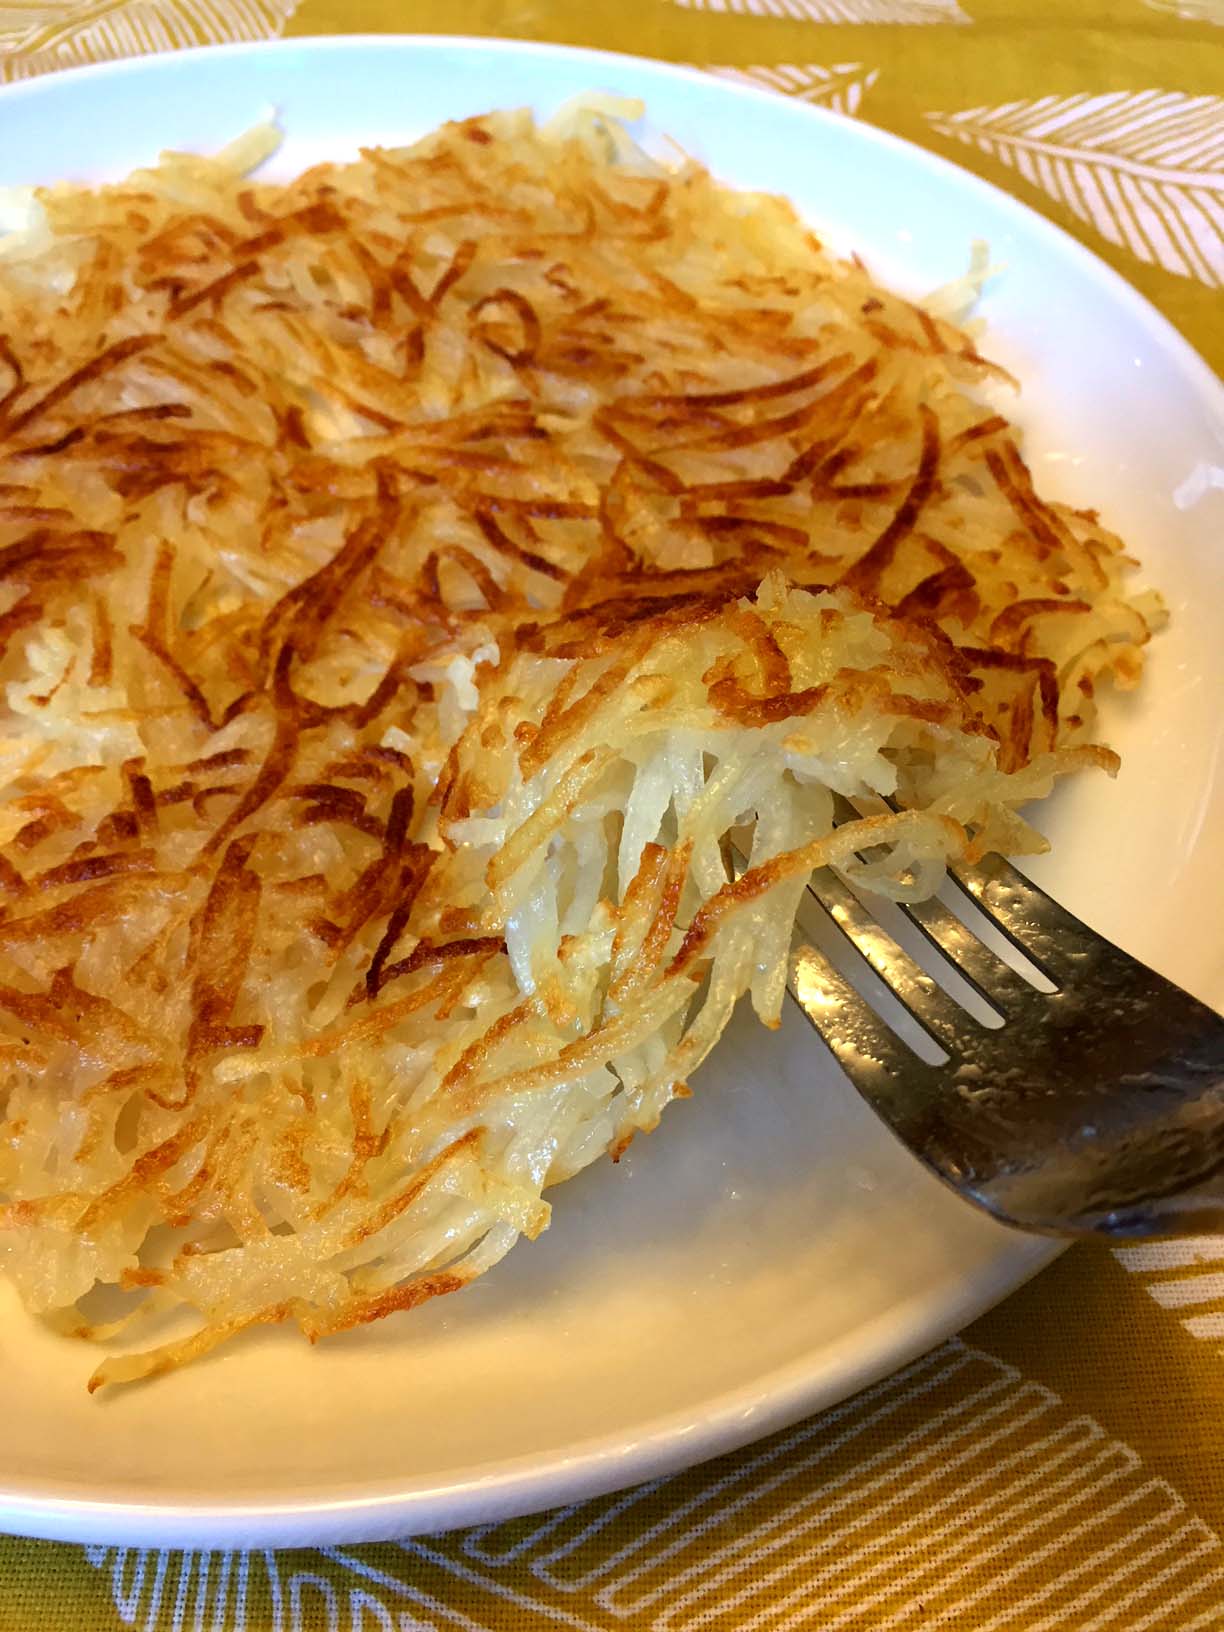 https://www.melaniecooks.com/wp-content/uploads/2018/03/hashbrowns_how_to_make_from_scratch.jpg